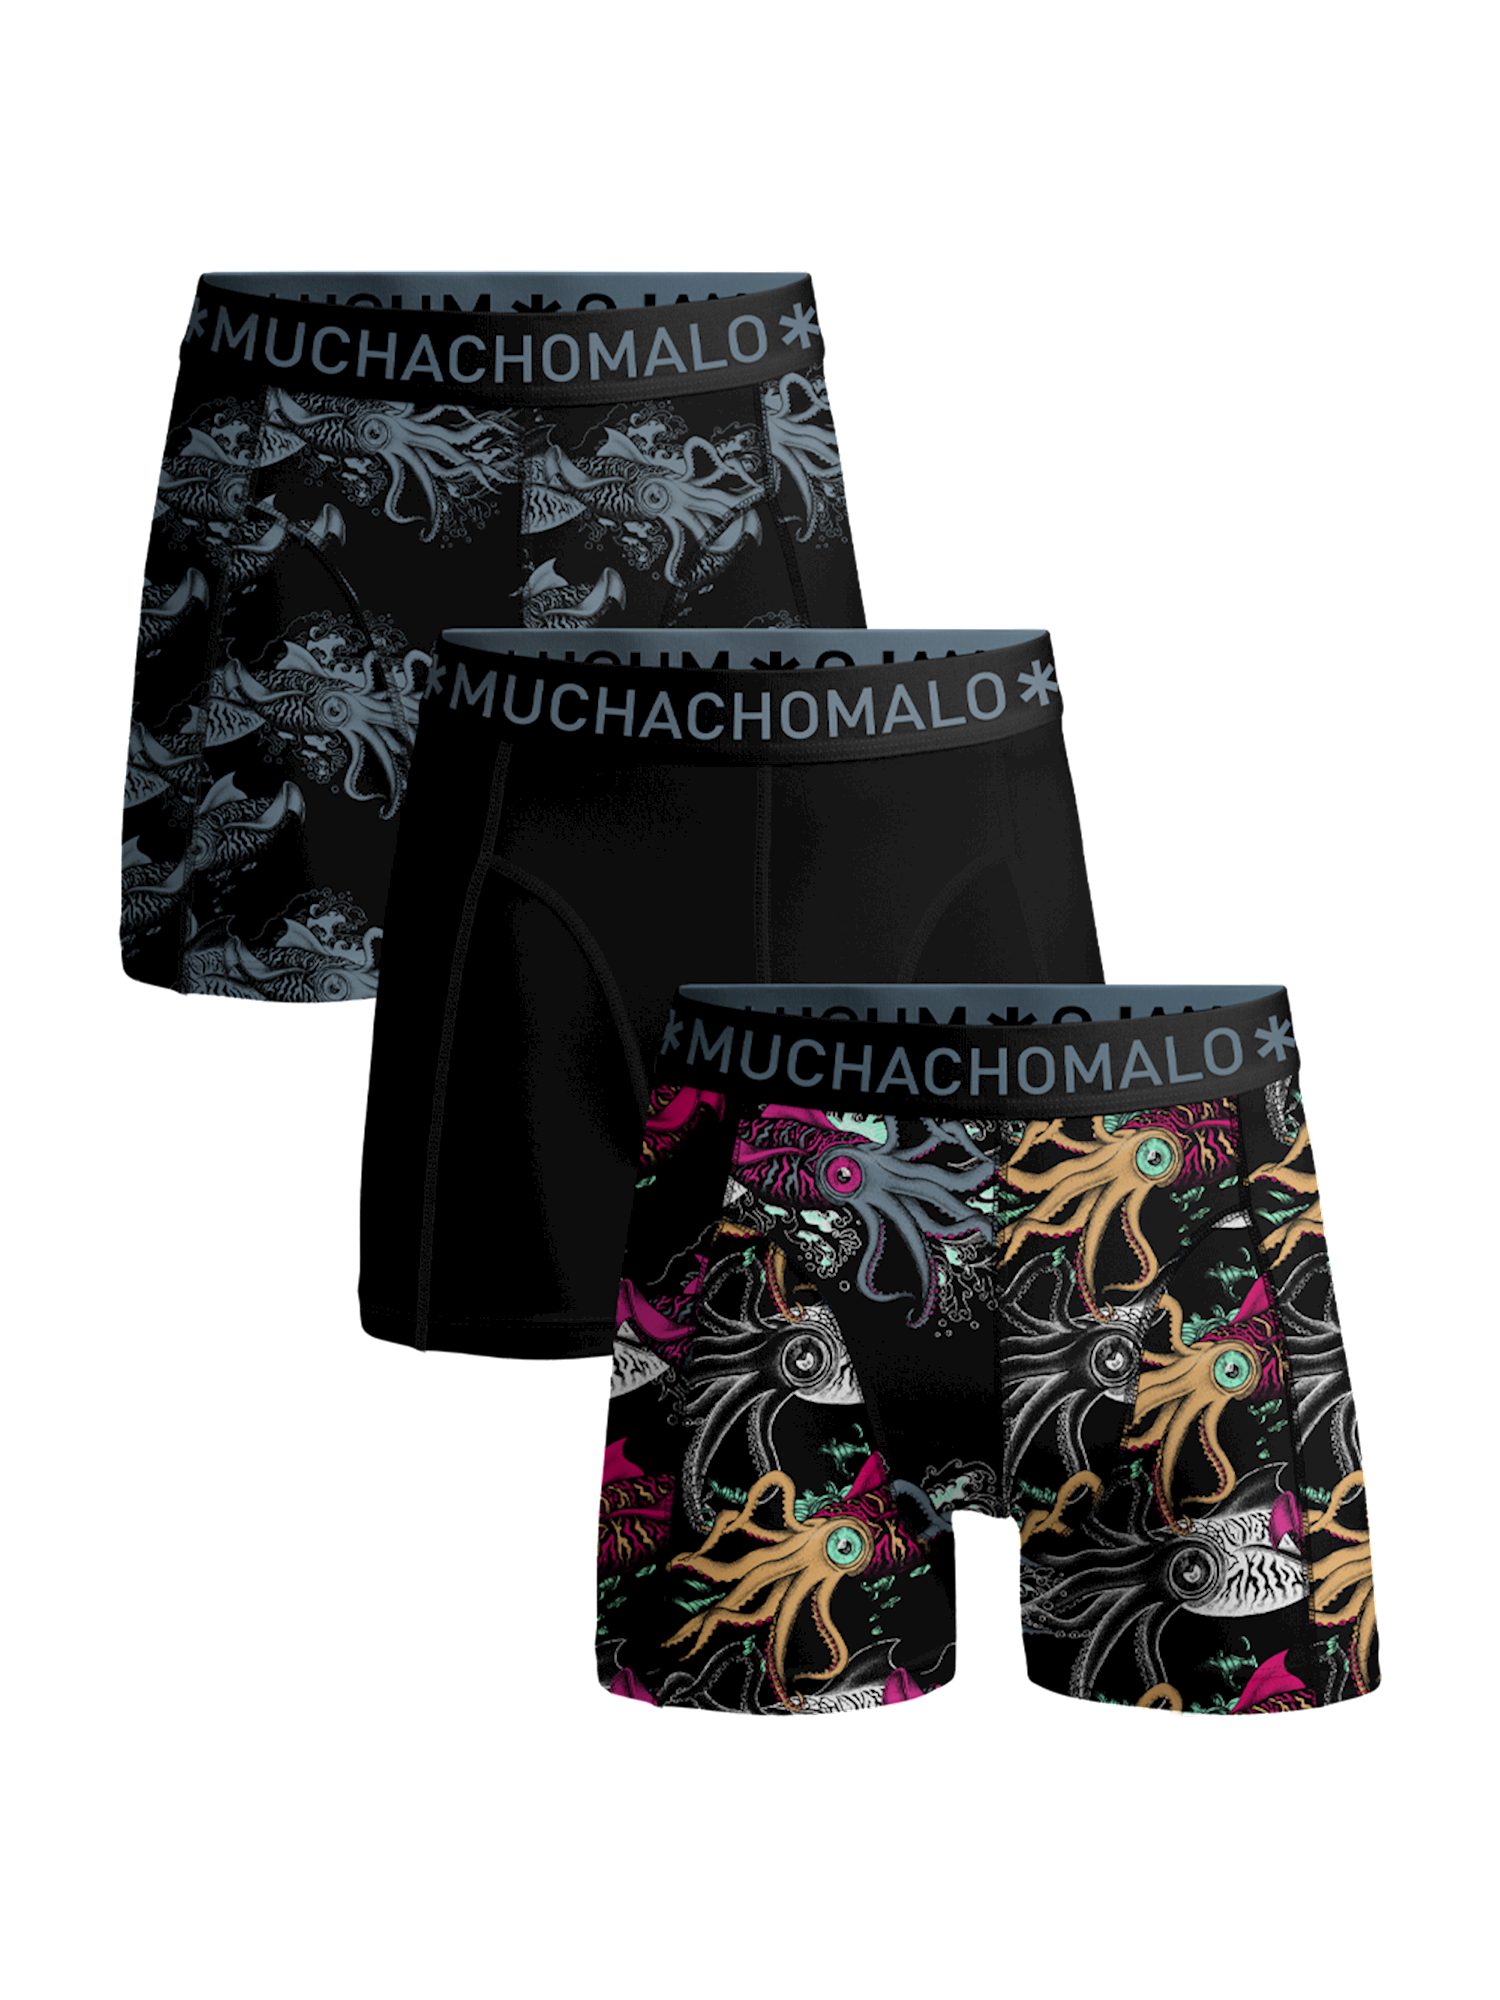 For more than 15 years, Muchachomalo has been shaking up the fashion world with men's underwear that is just a little different. We are here for men who listen to the voice telling them to live, hold their heads high and trust who they are. And also for the men who don't know yet that there is an inner bad boy in them. And we know very well that this involves certain quality requirements. You demand a lot from yourself and you are also critical of what you buy. No hay problema! Muchachomalo traditionally combines a relaxed vibe with a dose of self-assurance that typifies the man with the inner bad boy. And all this in a qualitative way, because we offer you underpants that you really feel good in. Every day again. From size S to XXXL for the hombre pequeño to the gran papi. And always of premium quality cotton with 10% elastane for the perfect fit and an eye for the planet.